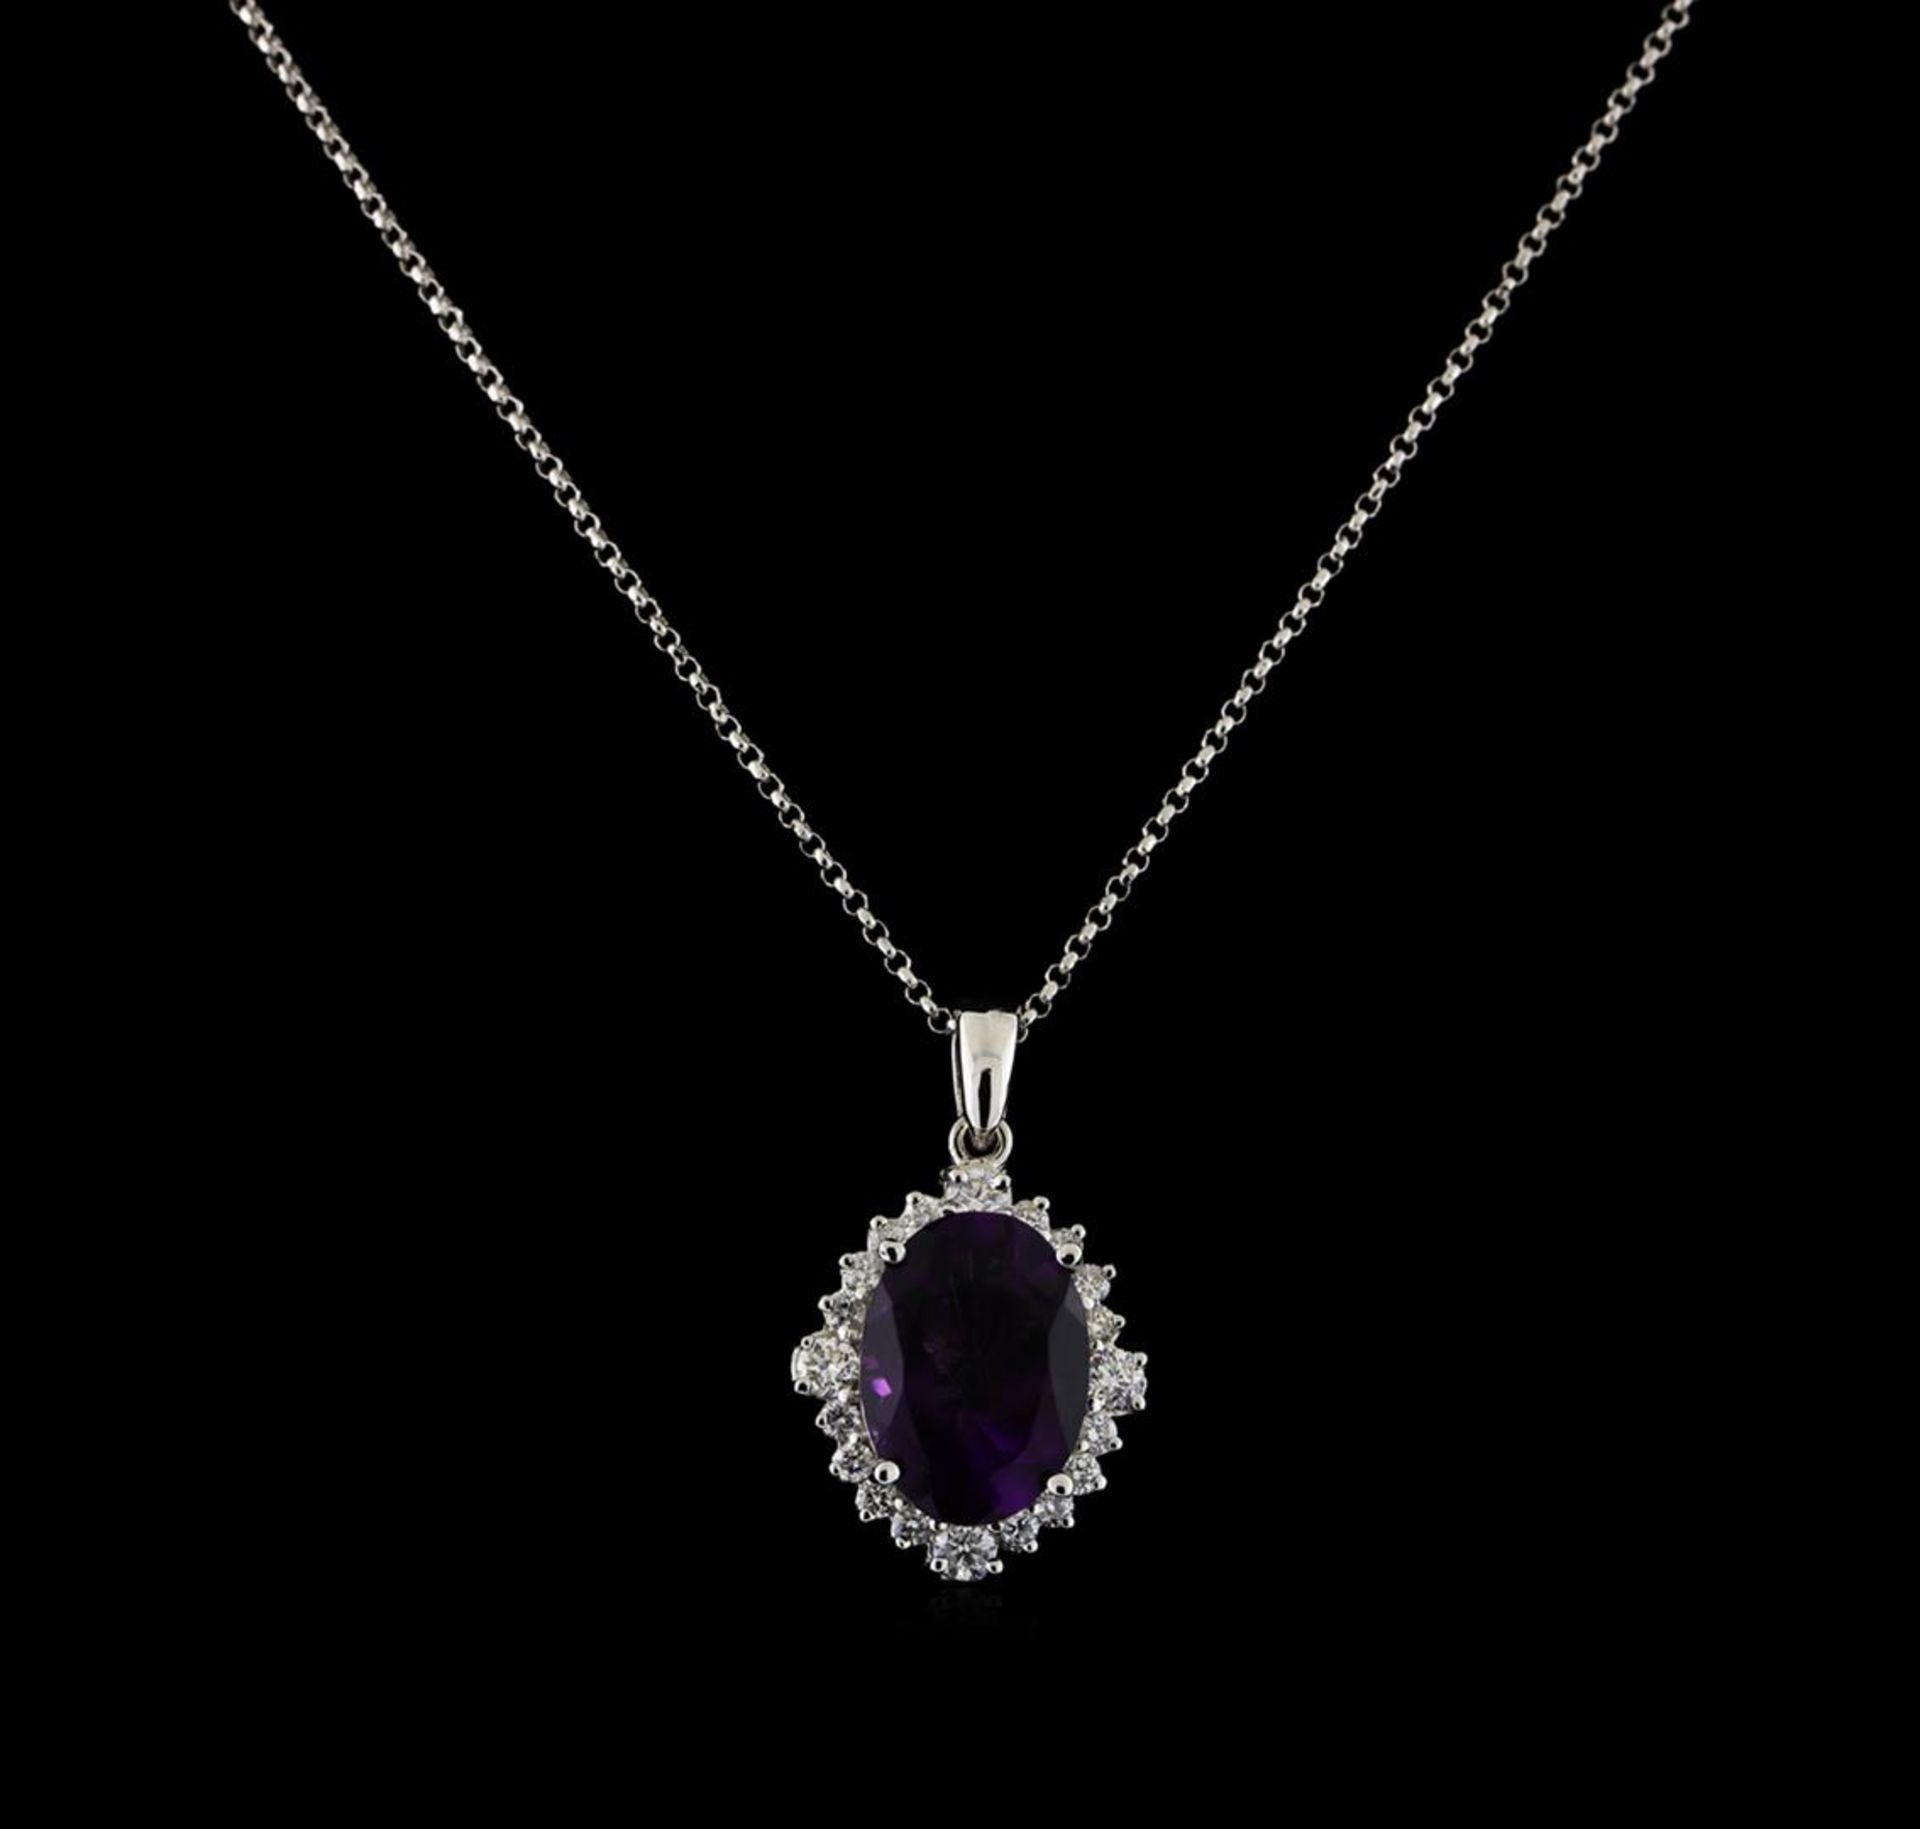 4.46 ctw Amethyst and Diamond Pendant With Chain - 14KT White Gold - Image 2 of 2